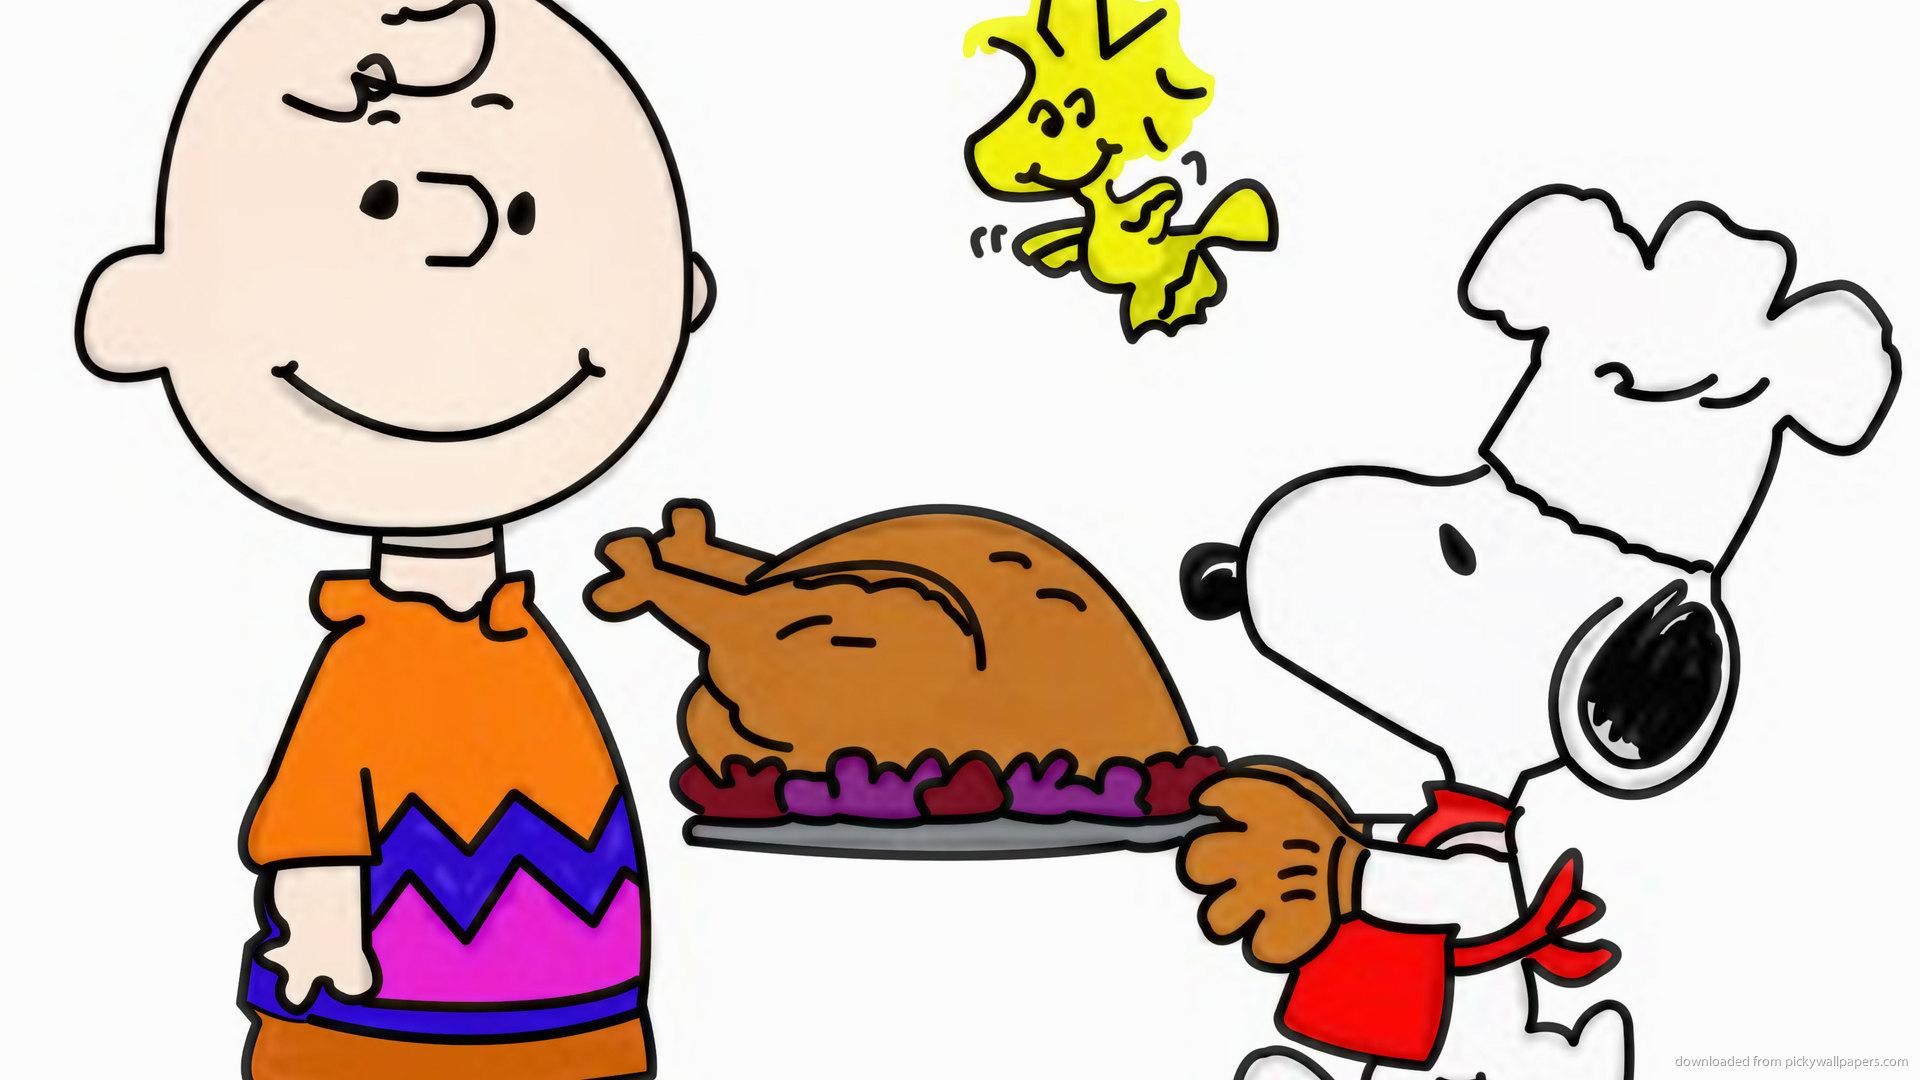 1920x1080 ... snoopy wallpaper hd page 3 of 3 wallpaper wiki; peanuts characters  wallpapers ...